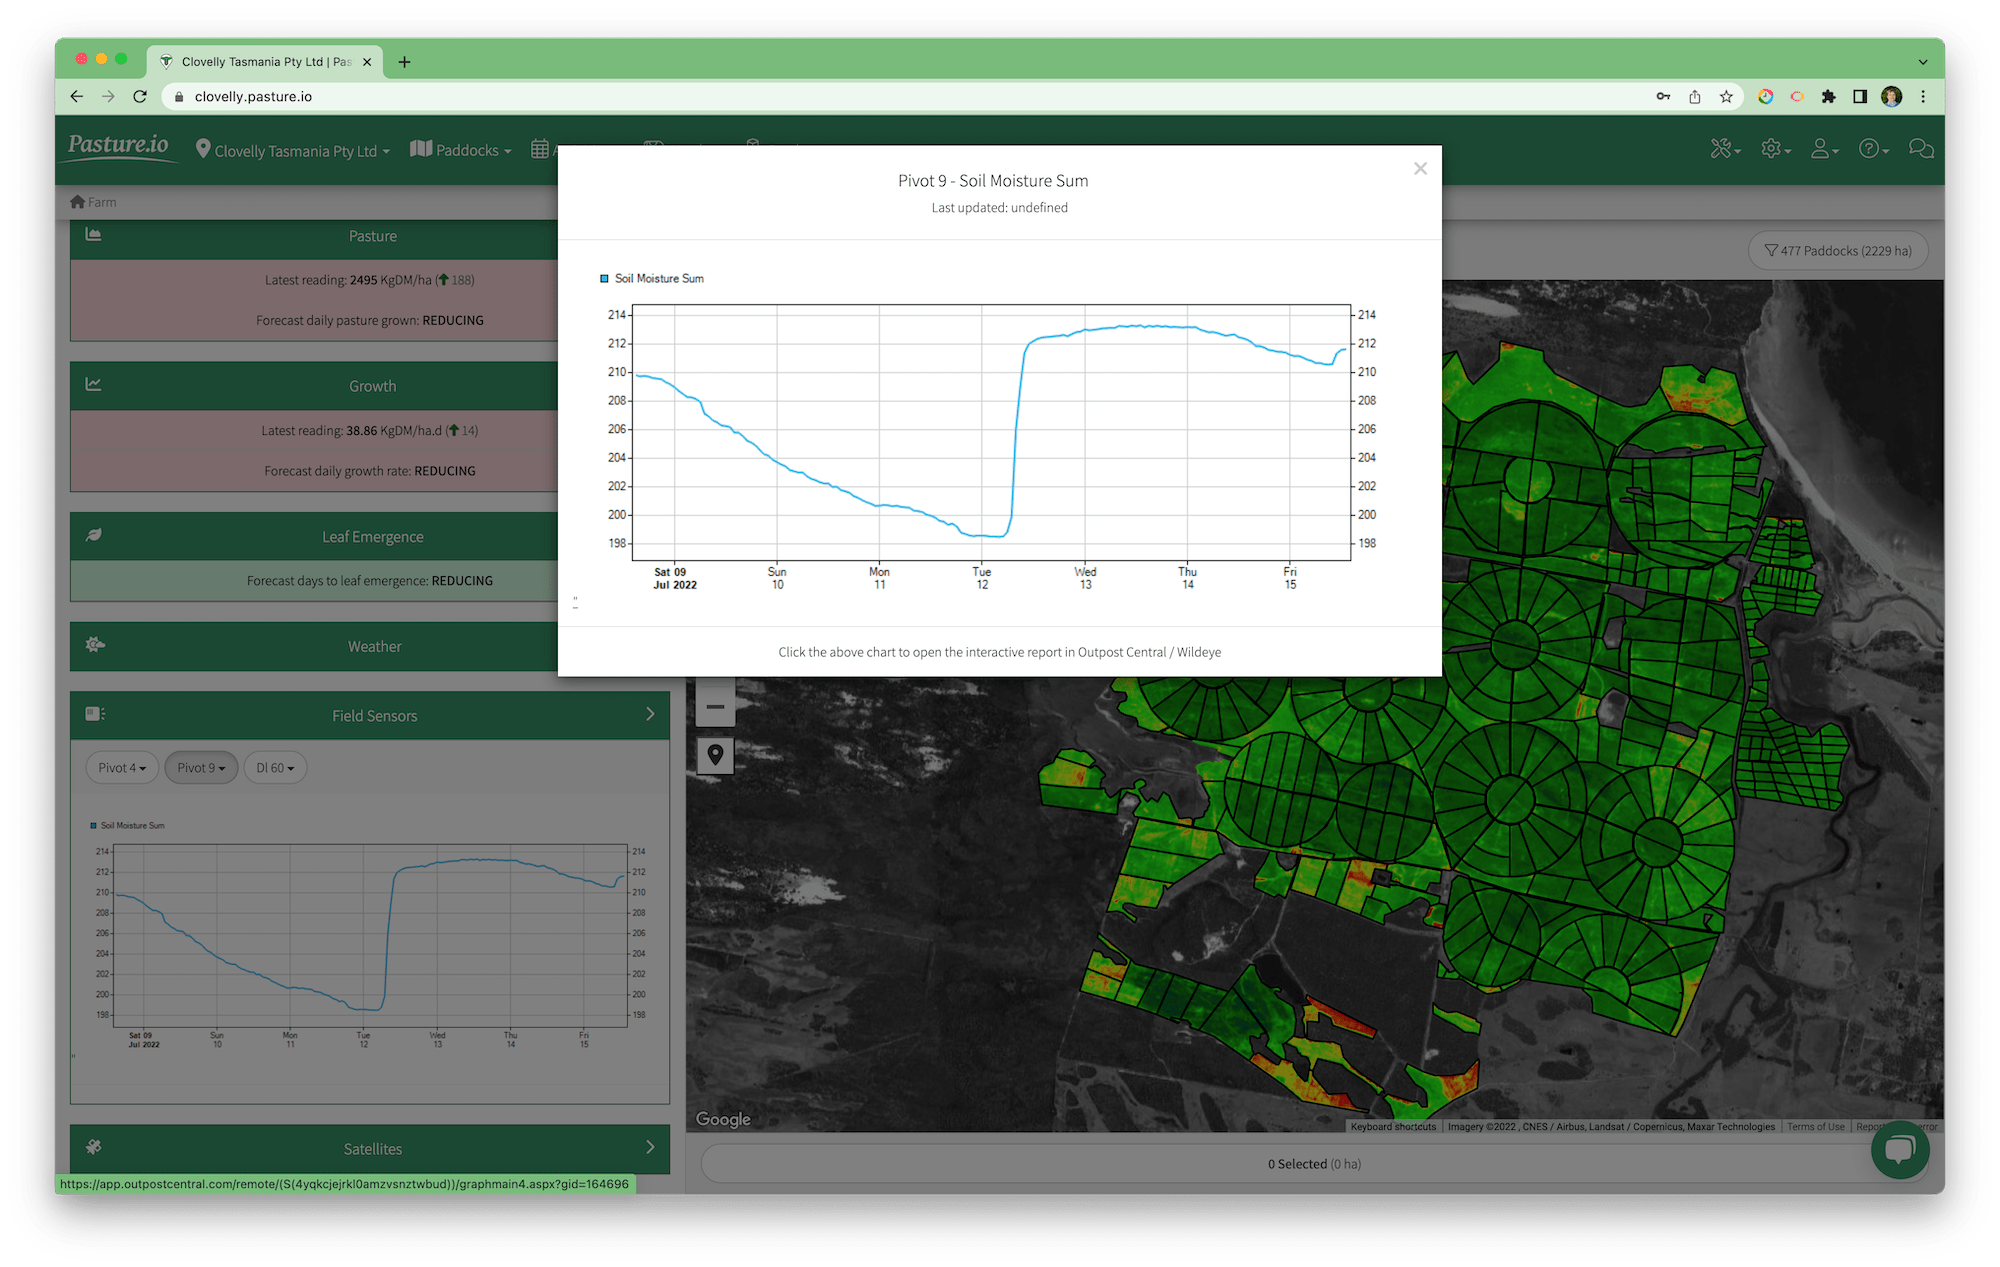 Within Pasture.io, you can view many types of field, paddock and soil sensors